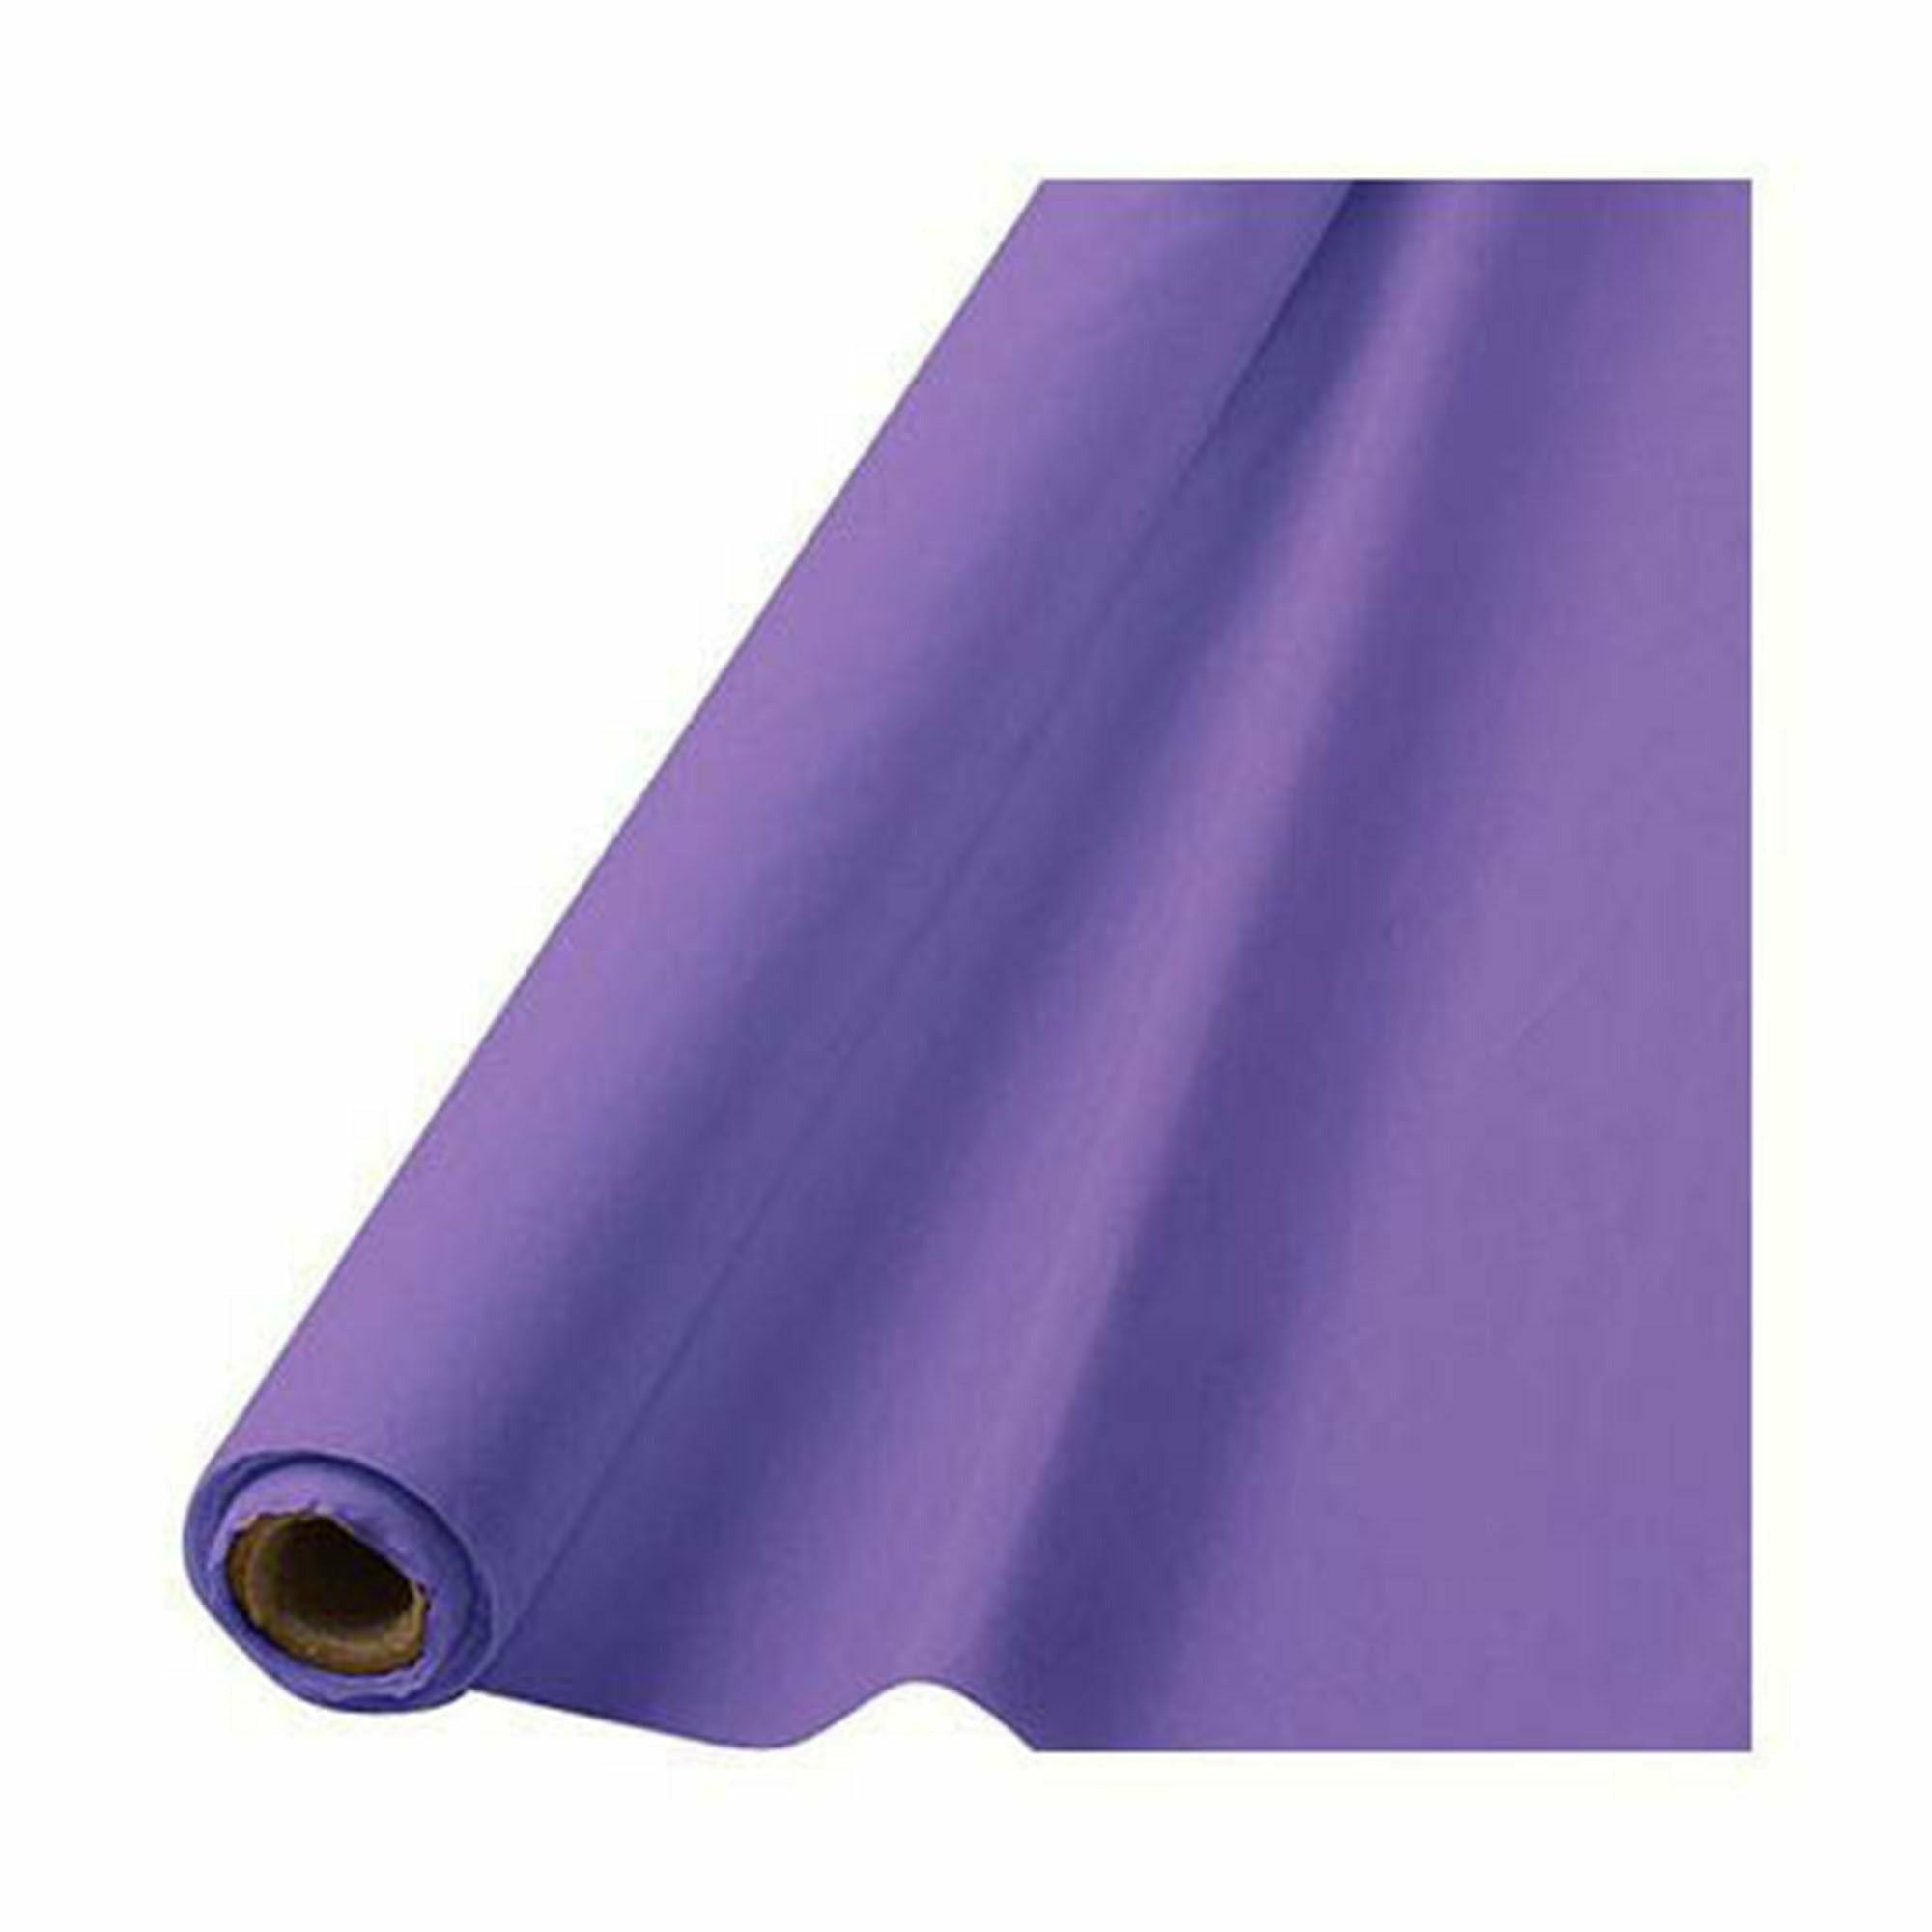 Amscan BASIC New Purple Plastic Table Cover Roll